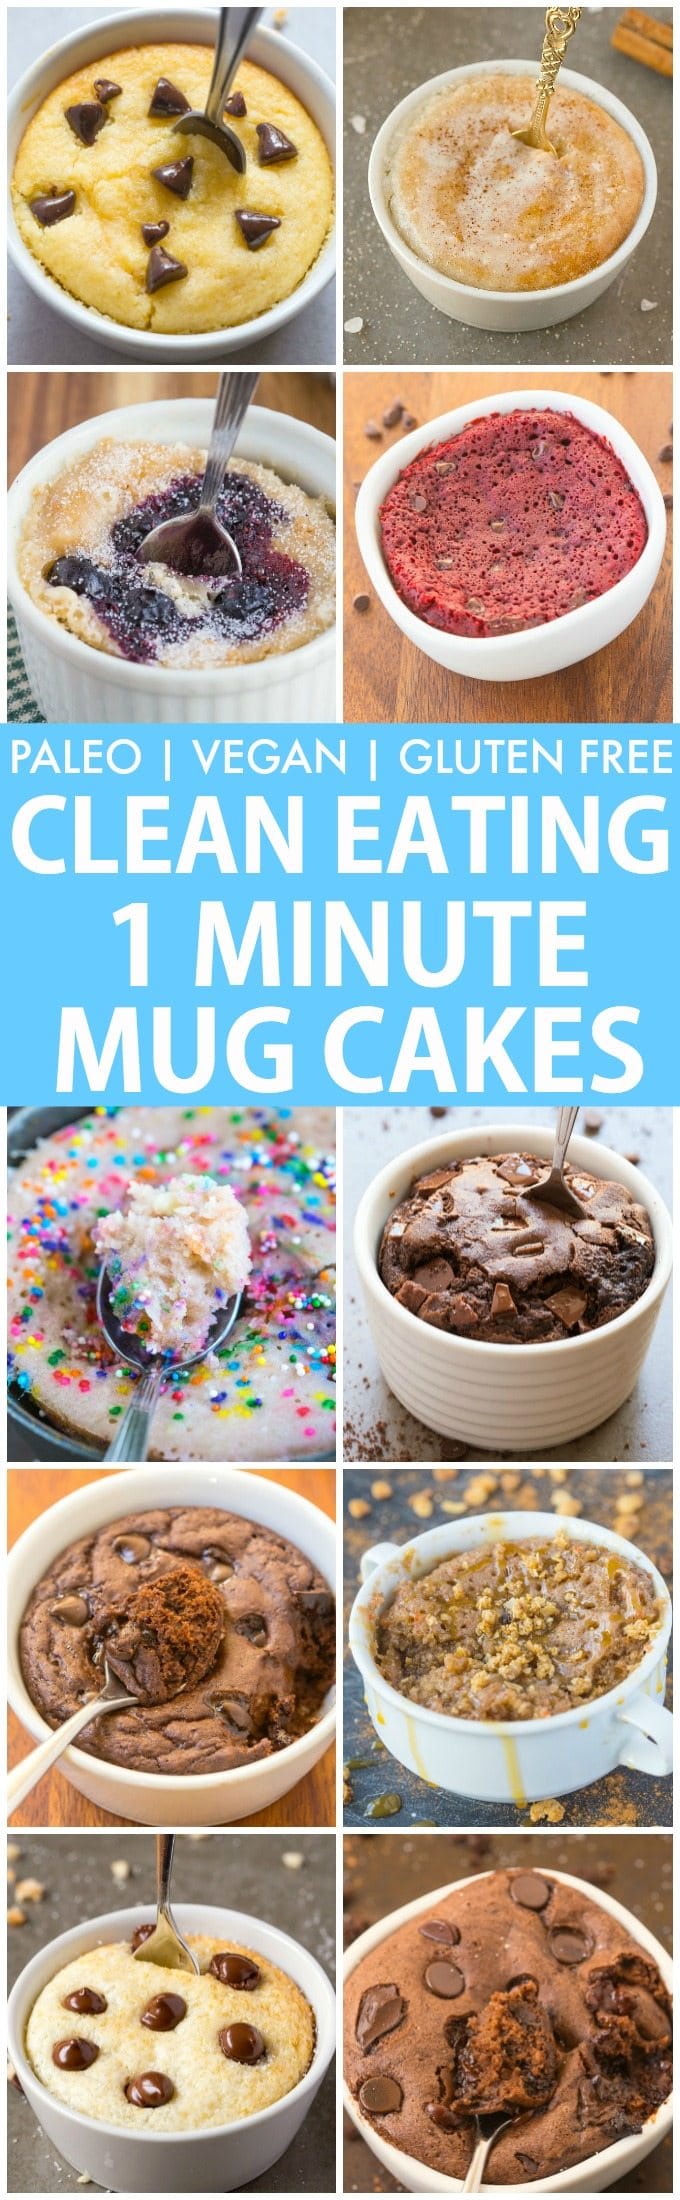 Clean Eating Healthy 1 Minute Mug Cakes, Brownies and Muffins (V, GF, Paleo)- Delicious, single-serve desserts and snacks which take less than a minute! Low carb, sugar free and more with OVEN options too! {vegan, gluten free, paleo recipe}- thebigmansworld.com